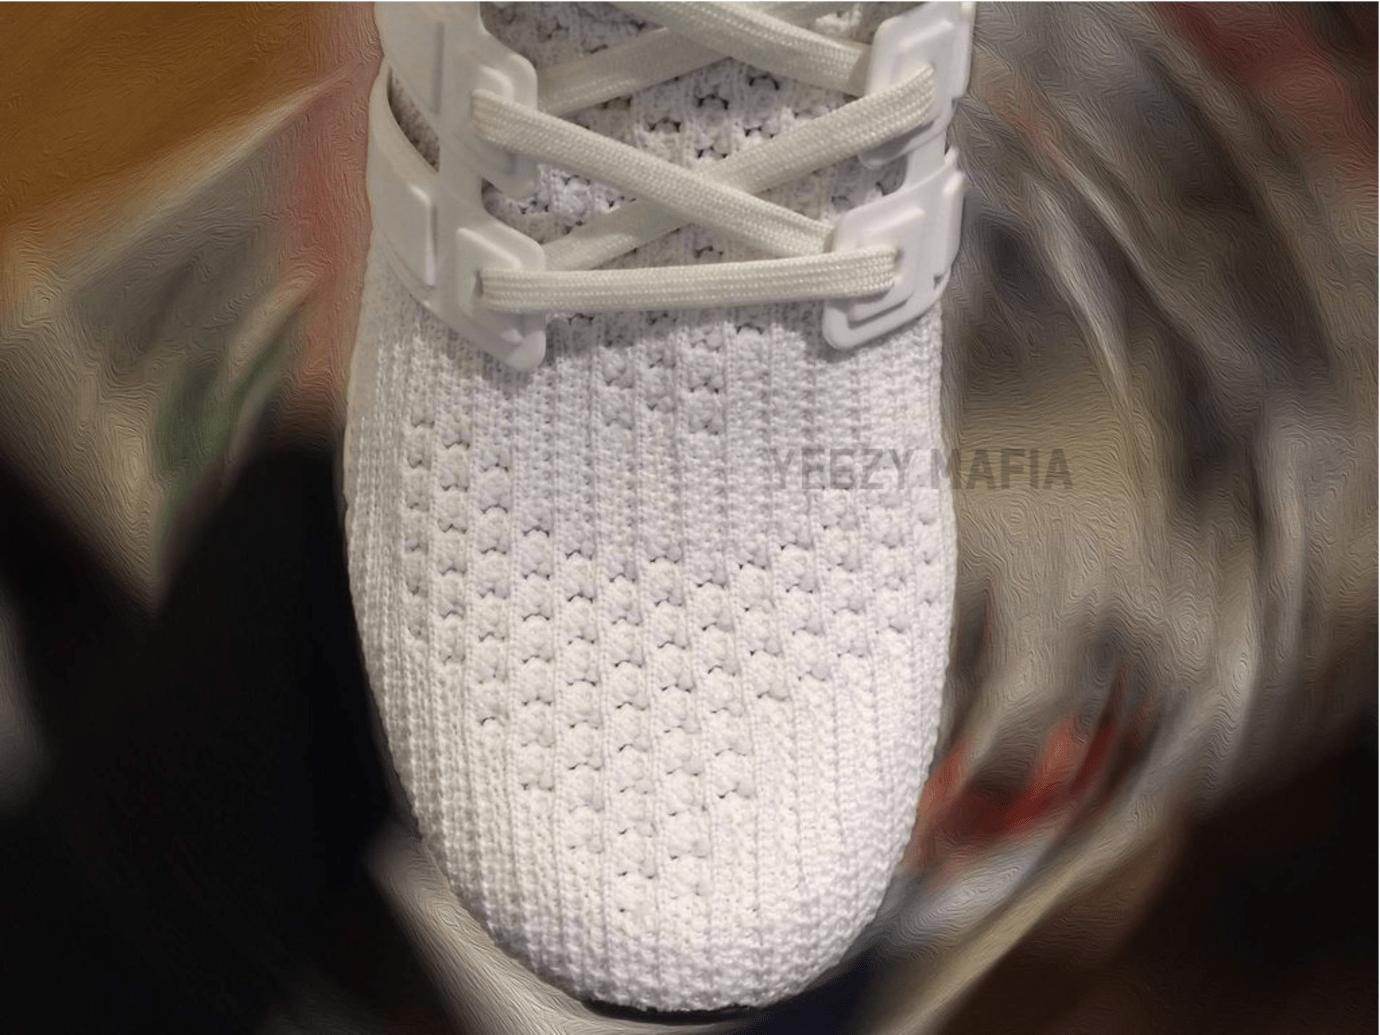 ULTRABOOST 19 DARK PIXEL unboxing, comparison and first